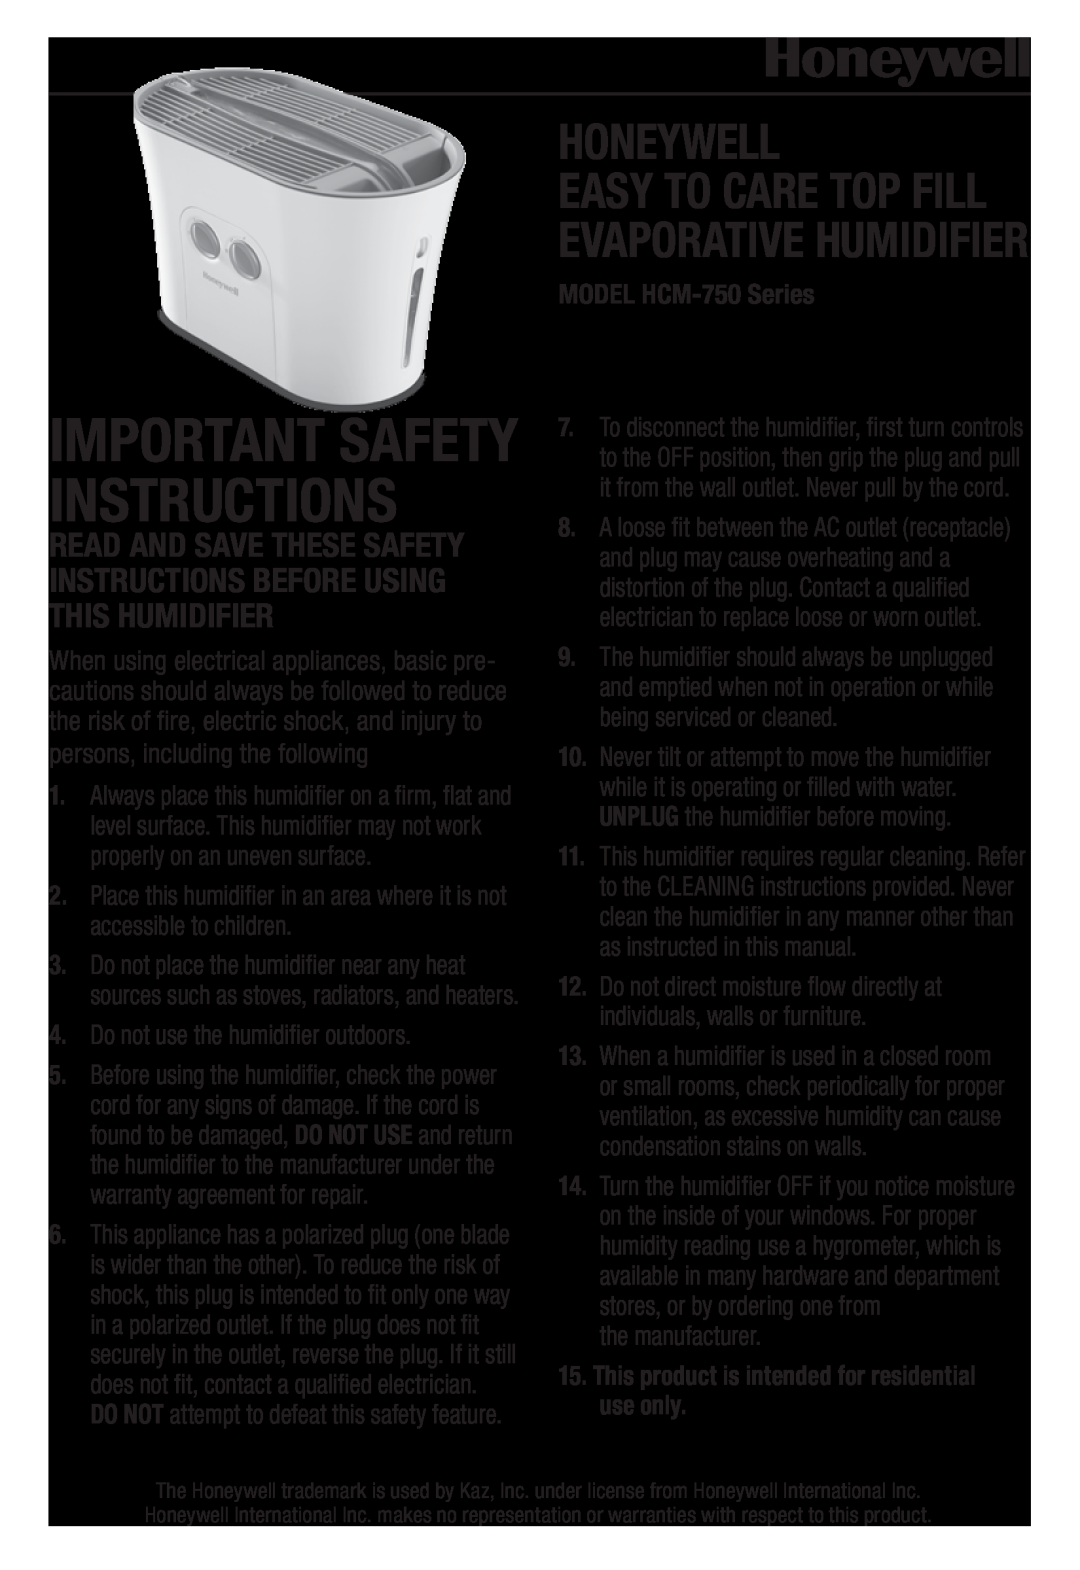 Honeywell HCM-750 important safety instructions Honeywell, Easy To Care Top Fill Evaporative Humidifier, use only 